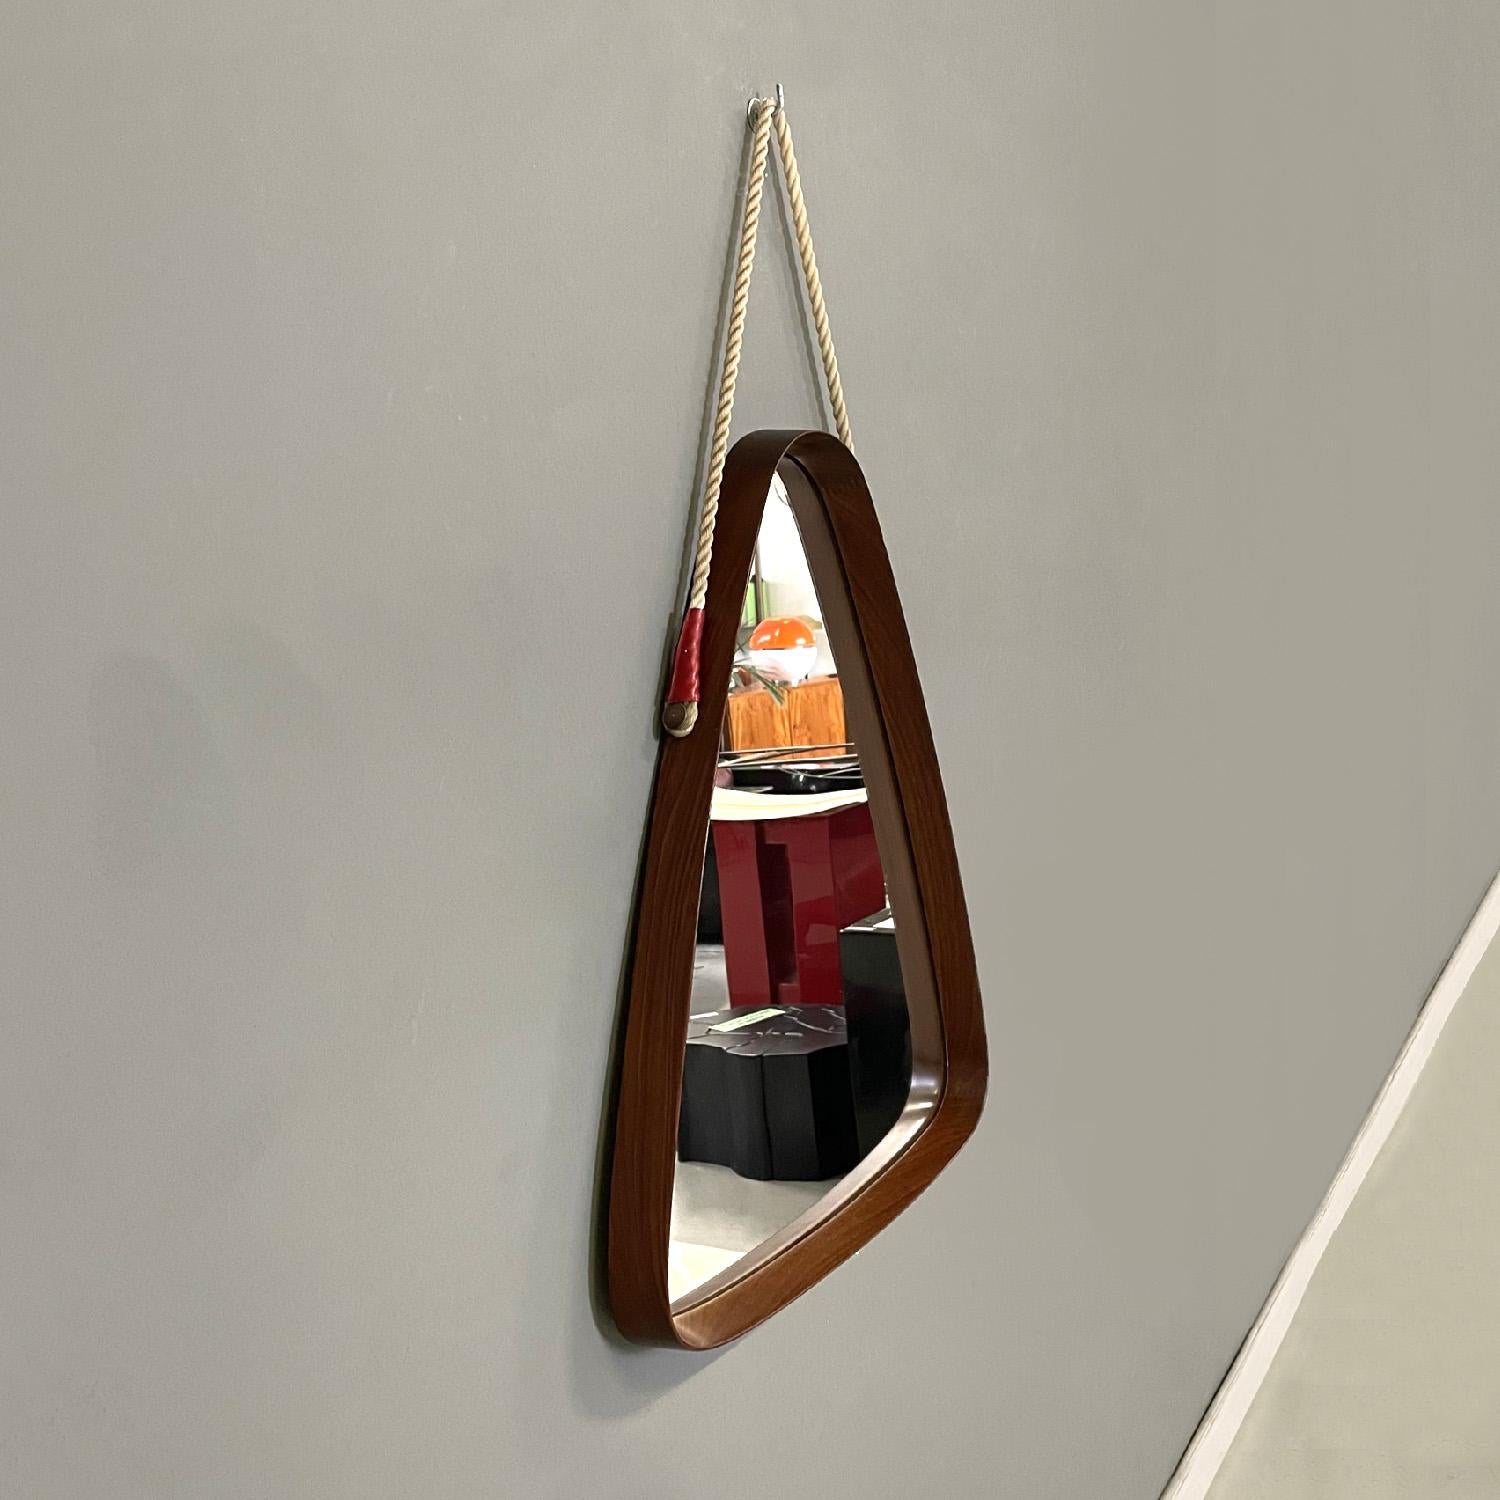 Italian mid-century modern solid wood triangular wall mirror with cord, 1960s
Triangular shaped wall mirror with rounded corners. Solid wood frame made up of different cuts of wood, note the slight difference in color and grain. It features a light